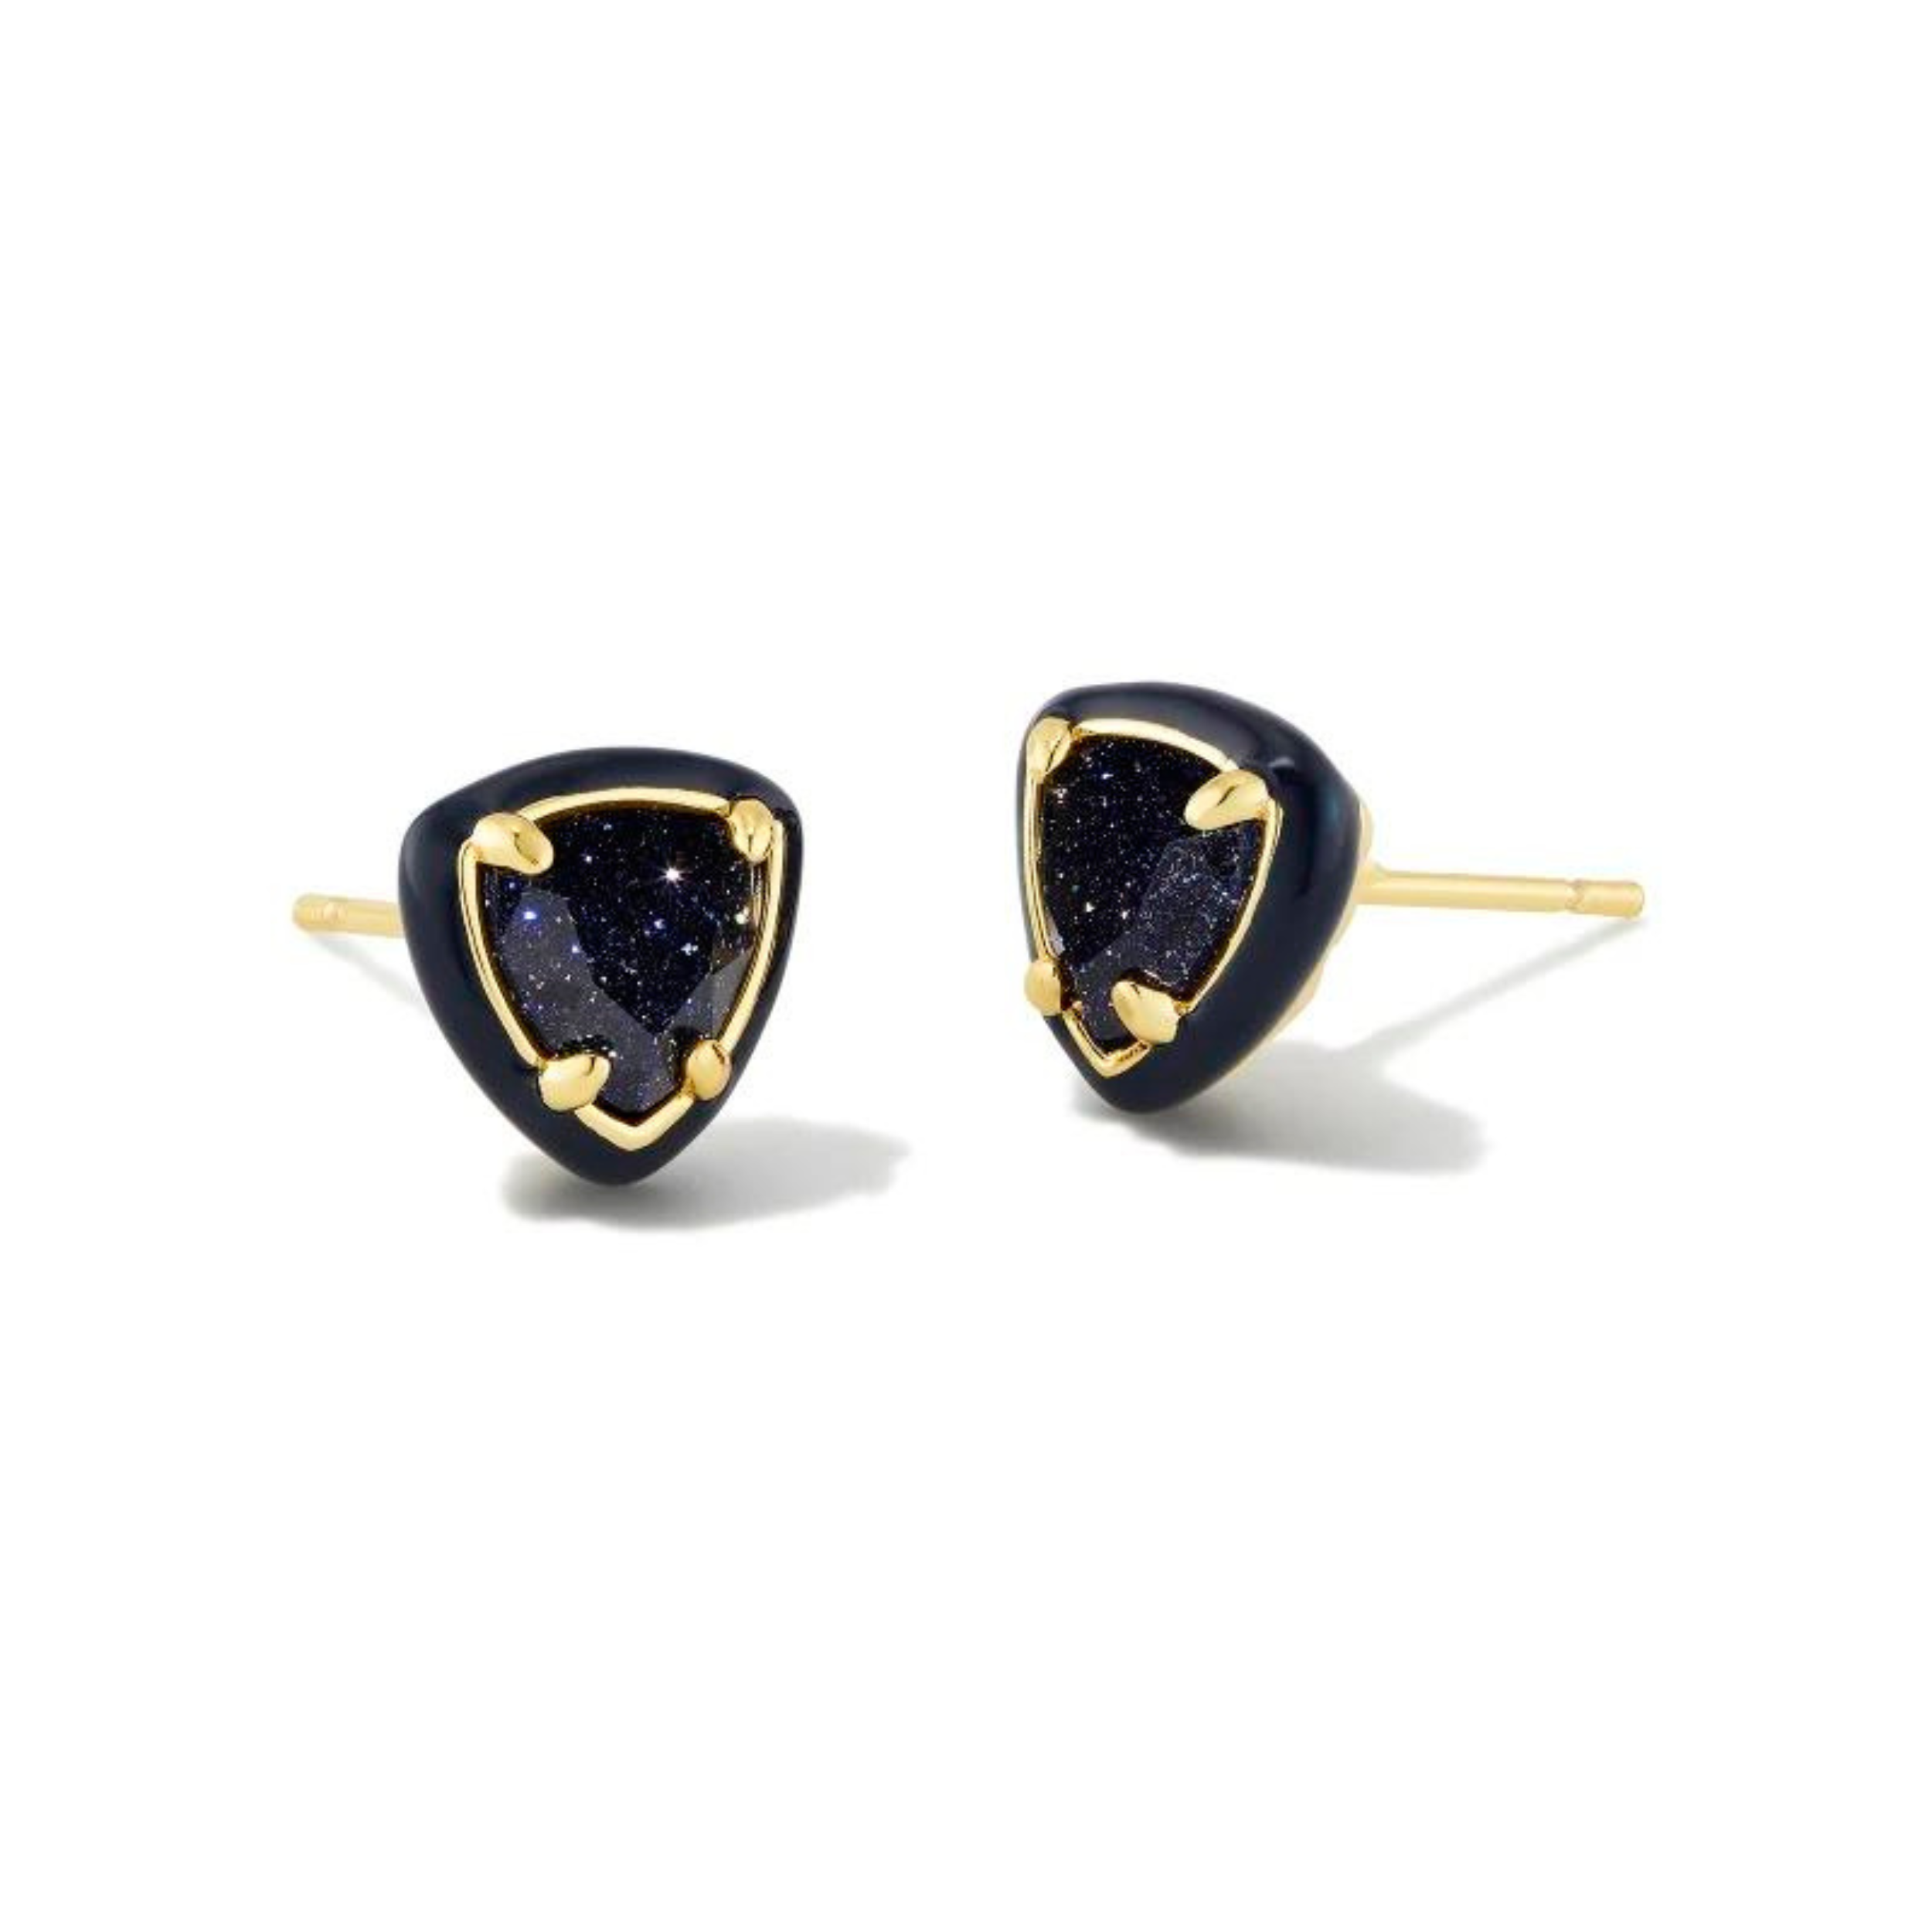 Navy framed, triangle shaped stud earrings with a center navy stone and a gold ear post. These earrings are pictured on a white background. 